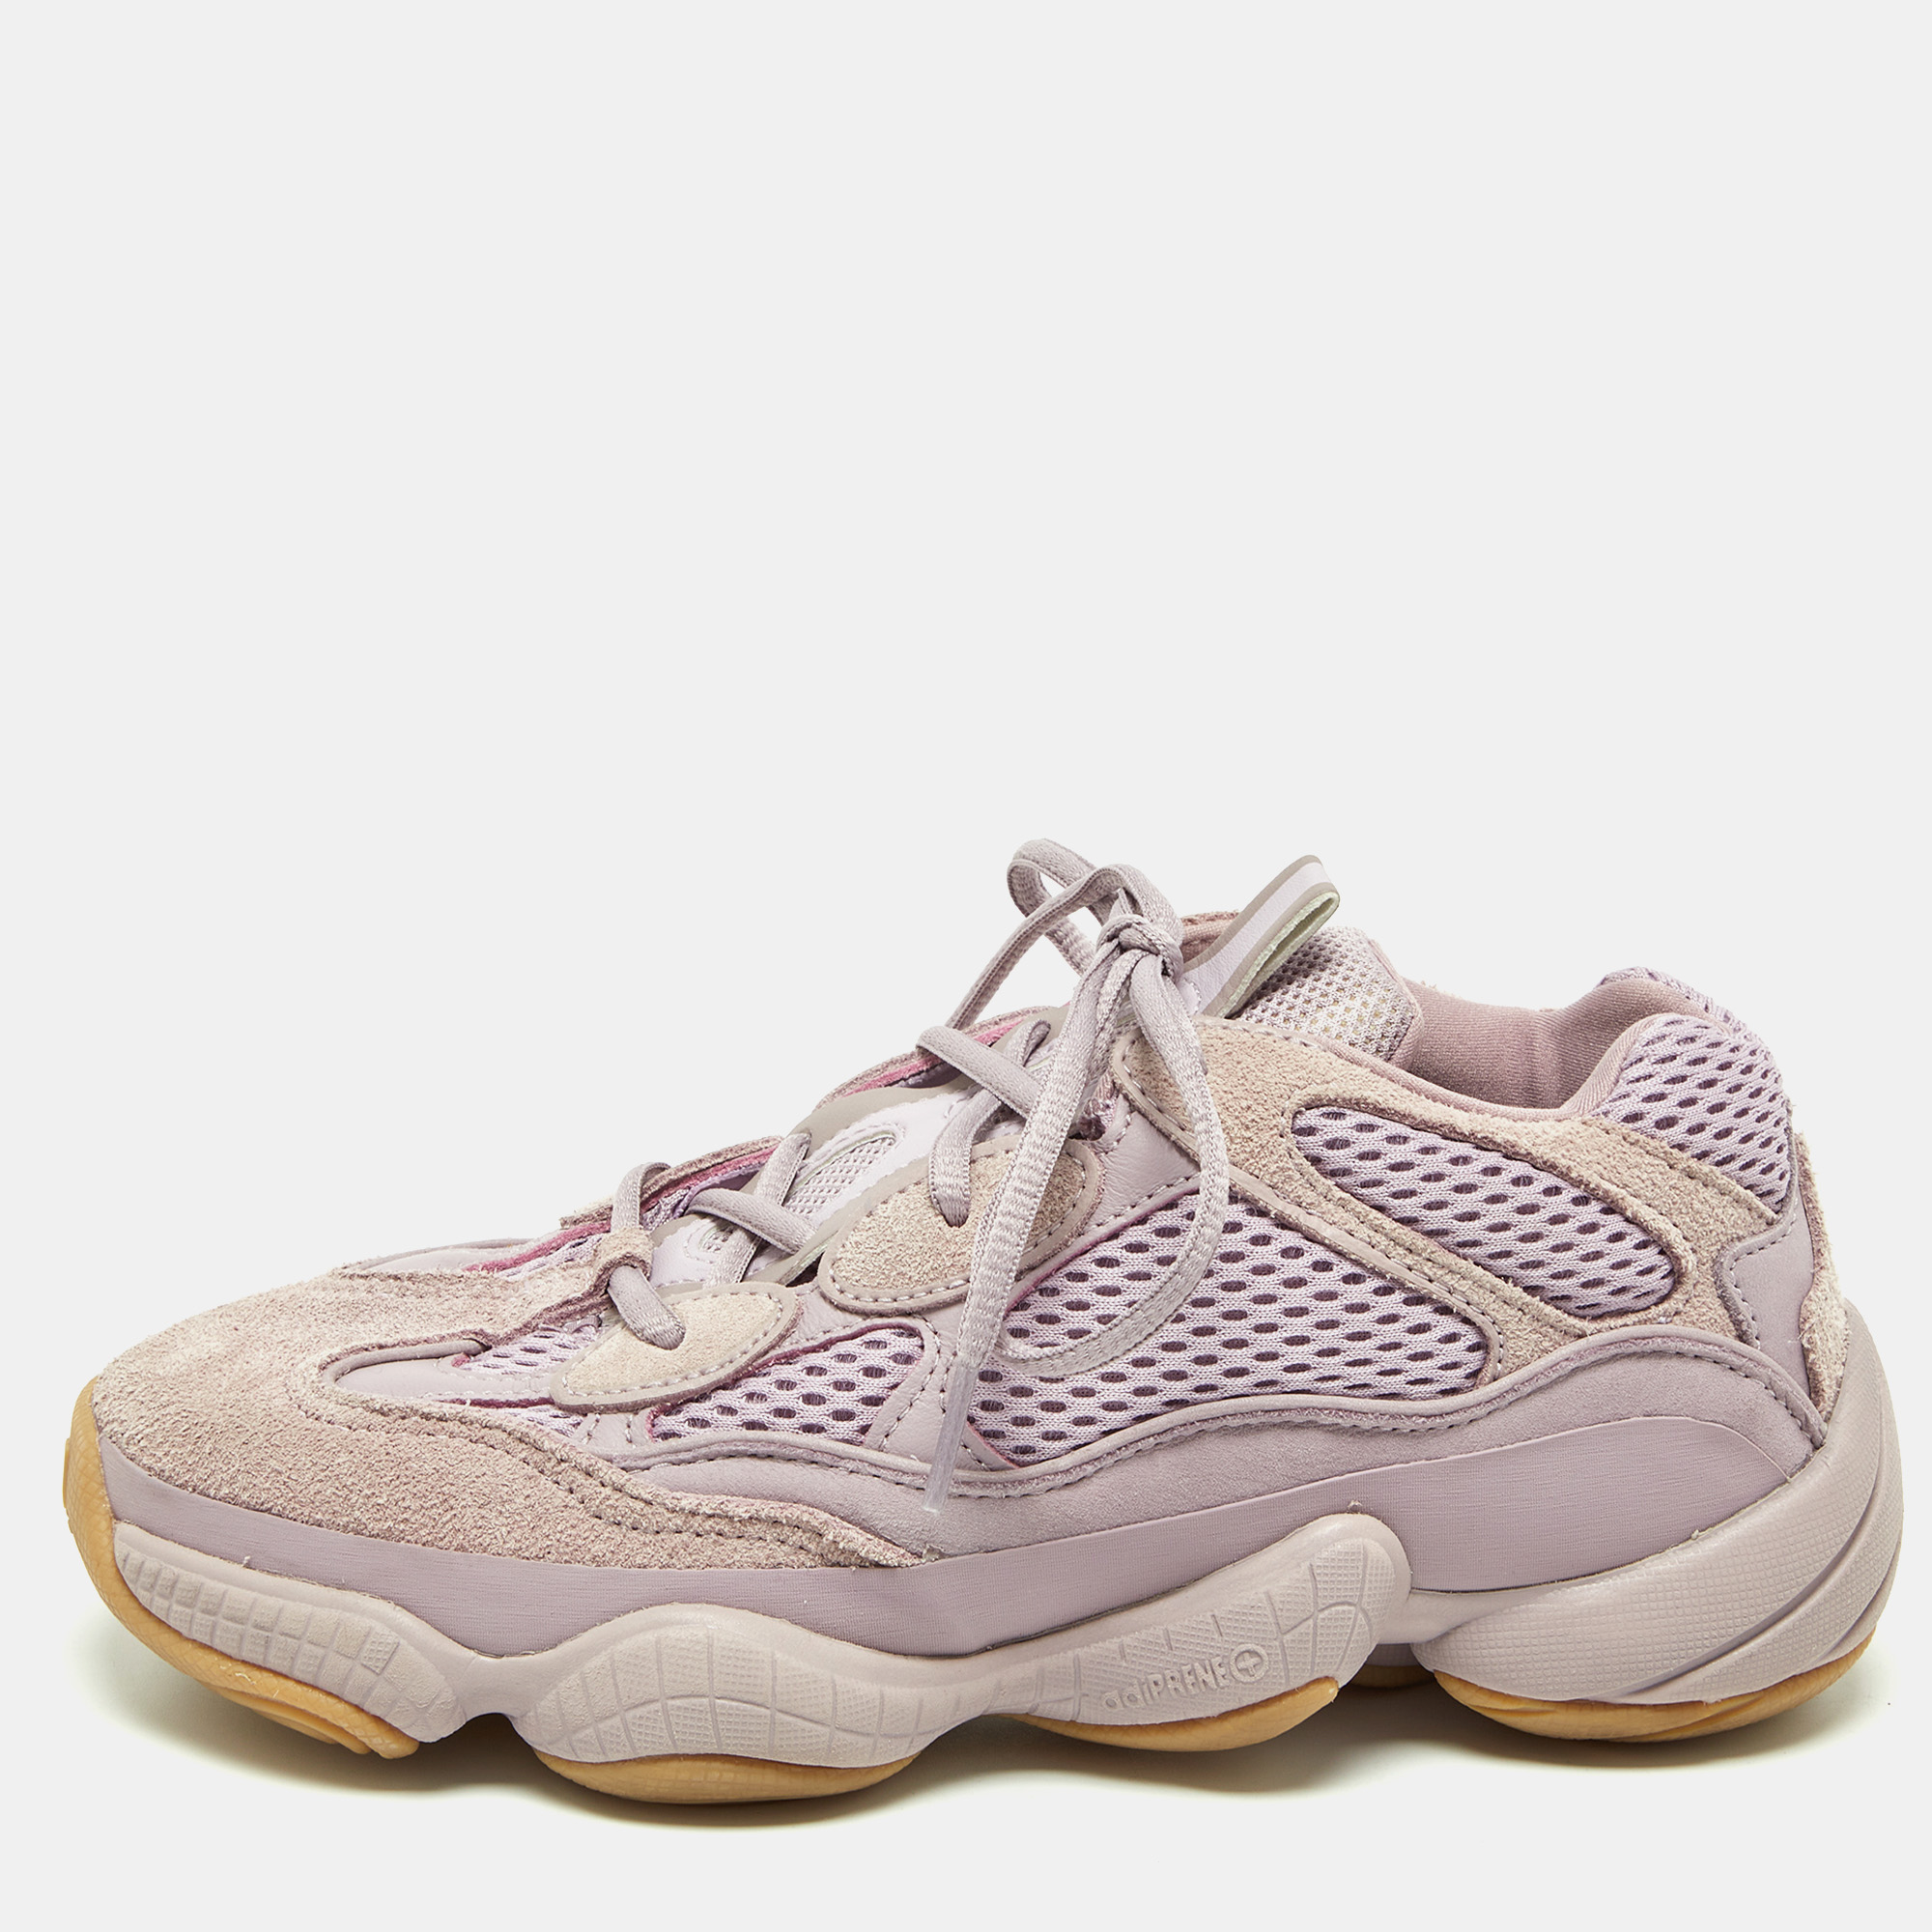 

Yeezy x Adidas Purple Suede and Mesh Yeezy 500 Soft Vision Sneakers Size